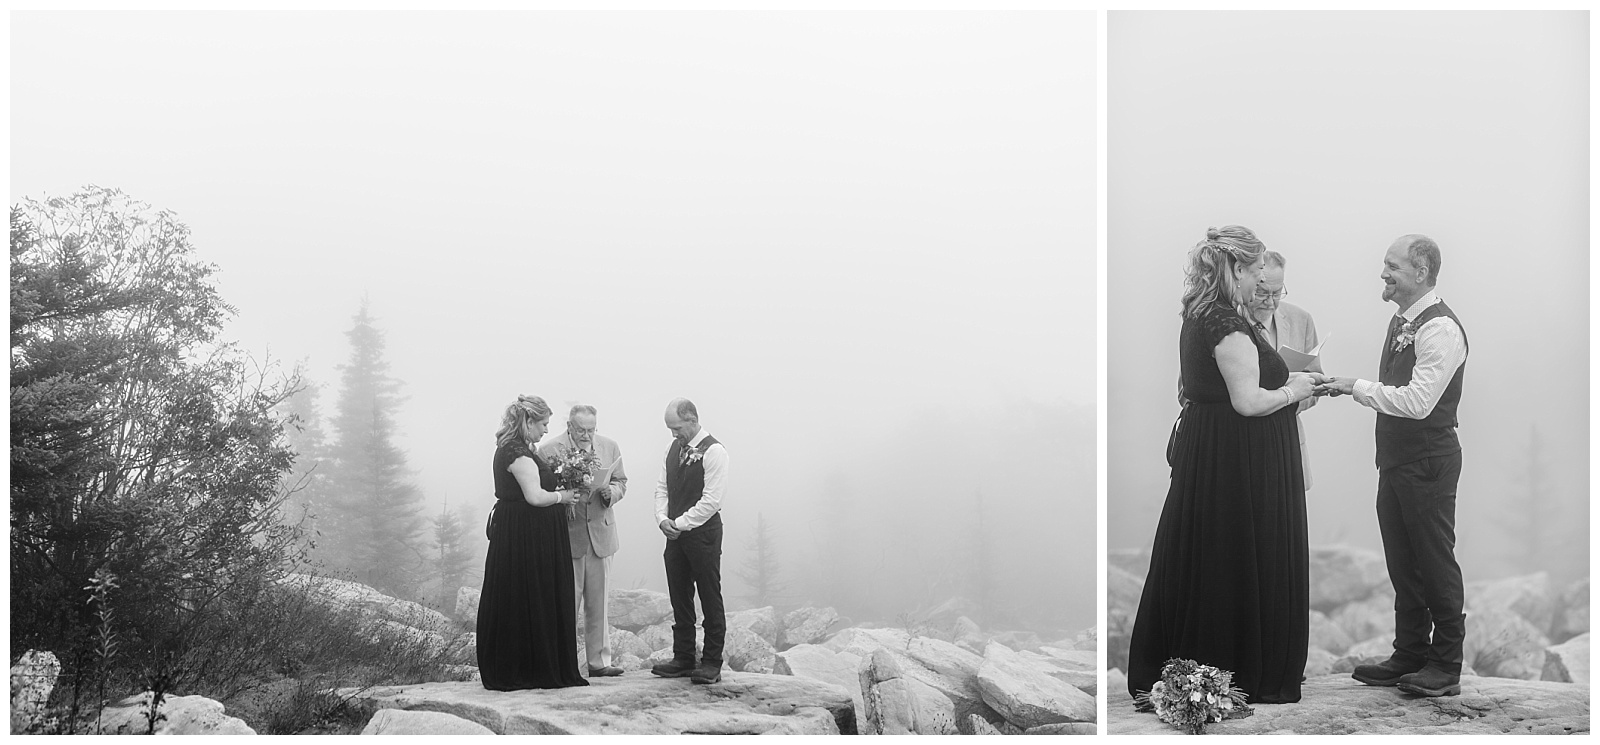 Dolly Sods Elopement